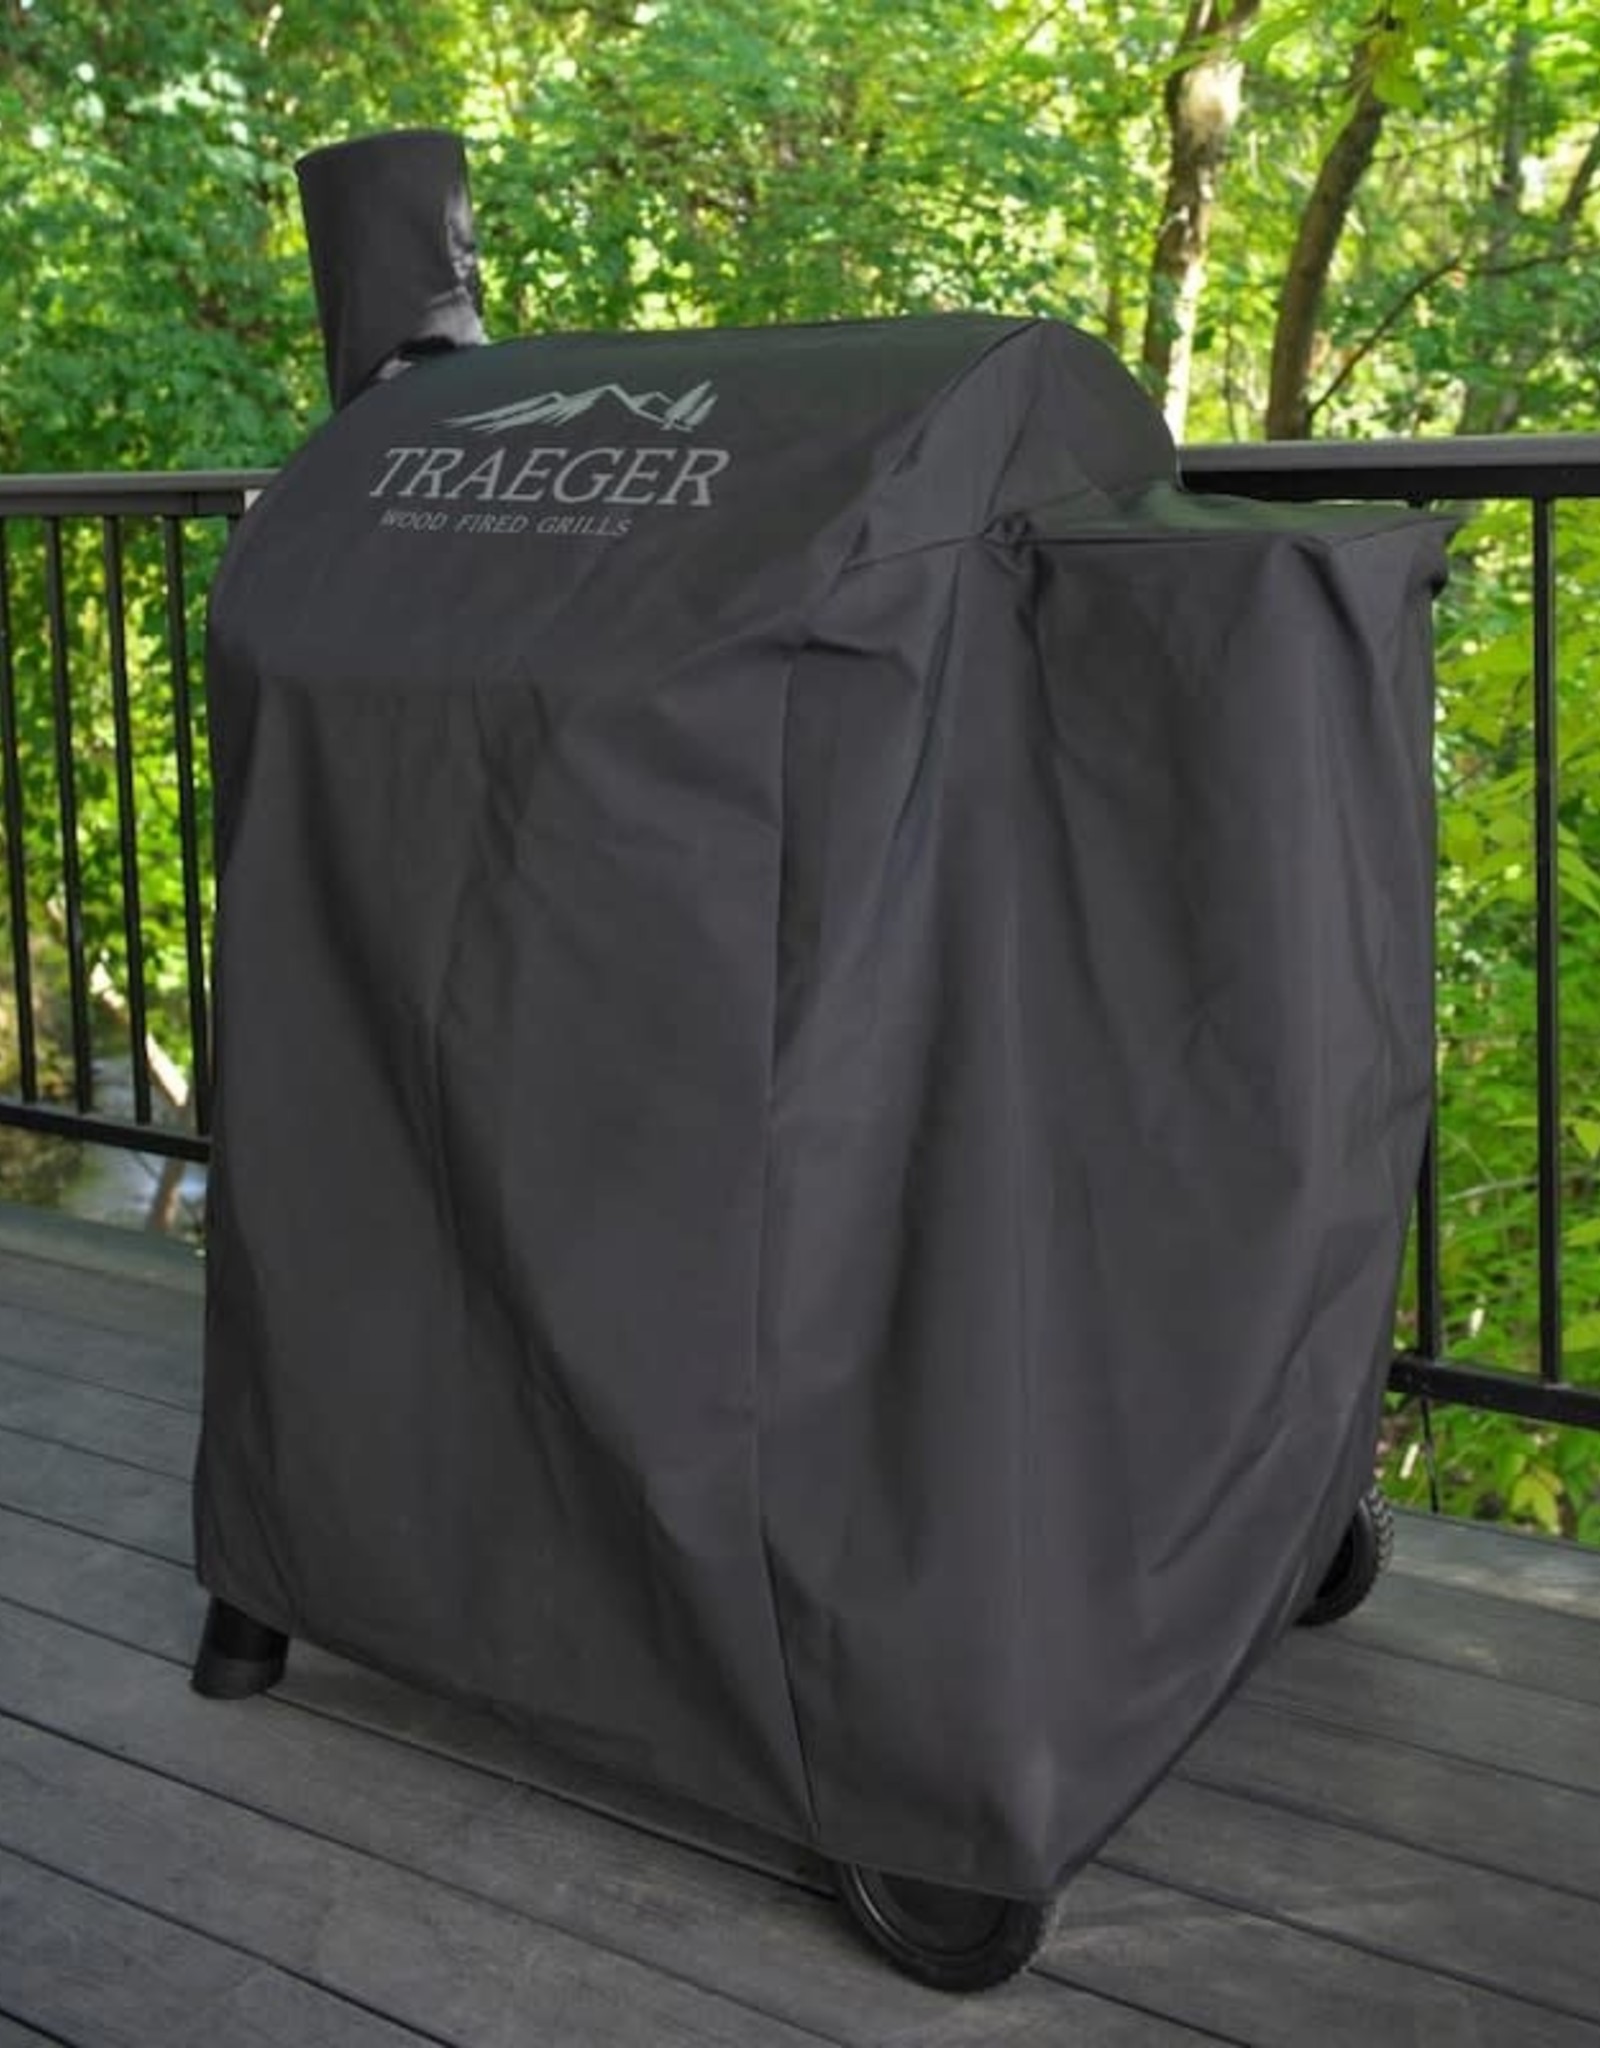 Traeger Traeger Full Length Grill Cover For Pro 575 Series Pellet Grills - BAC503